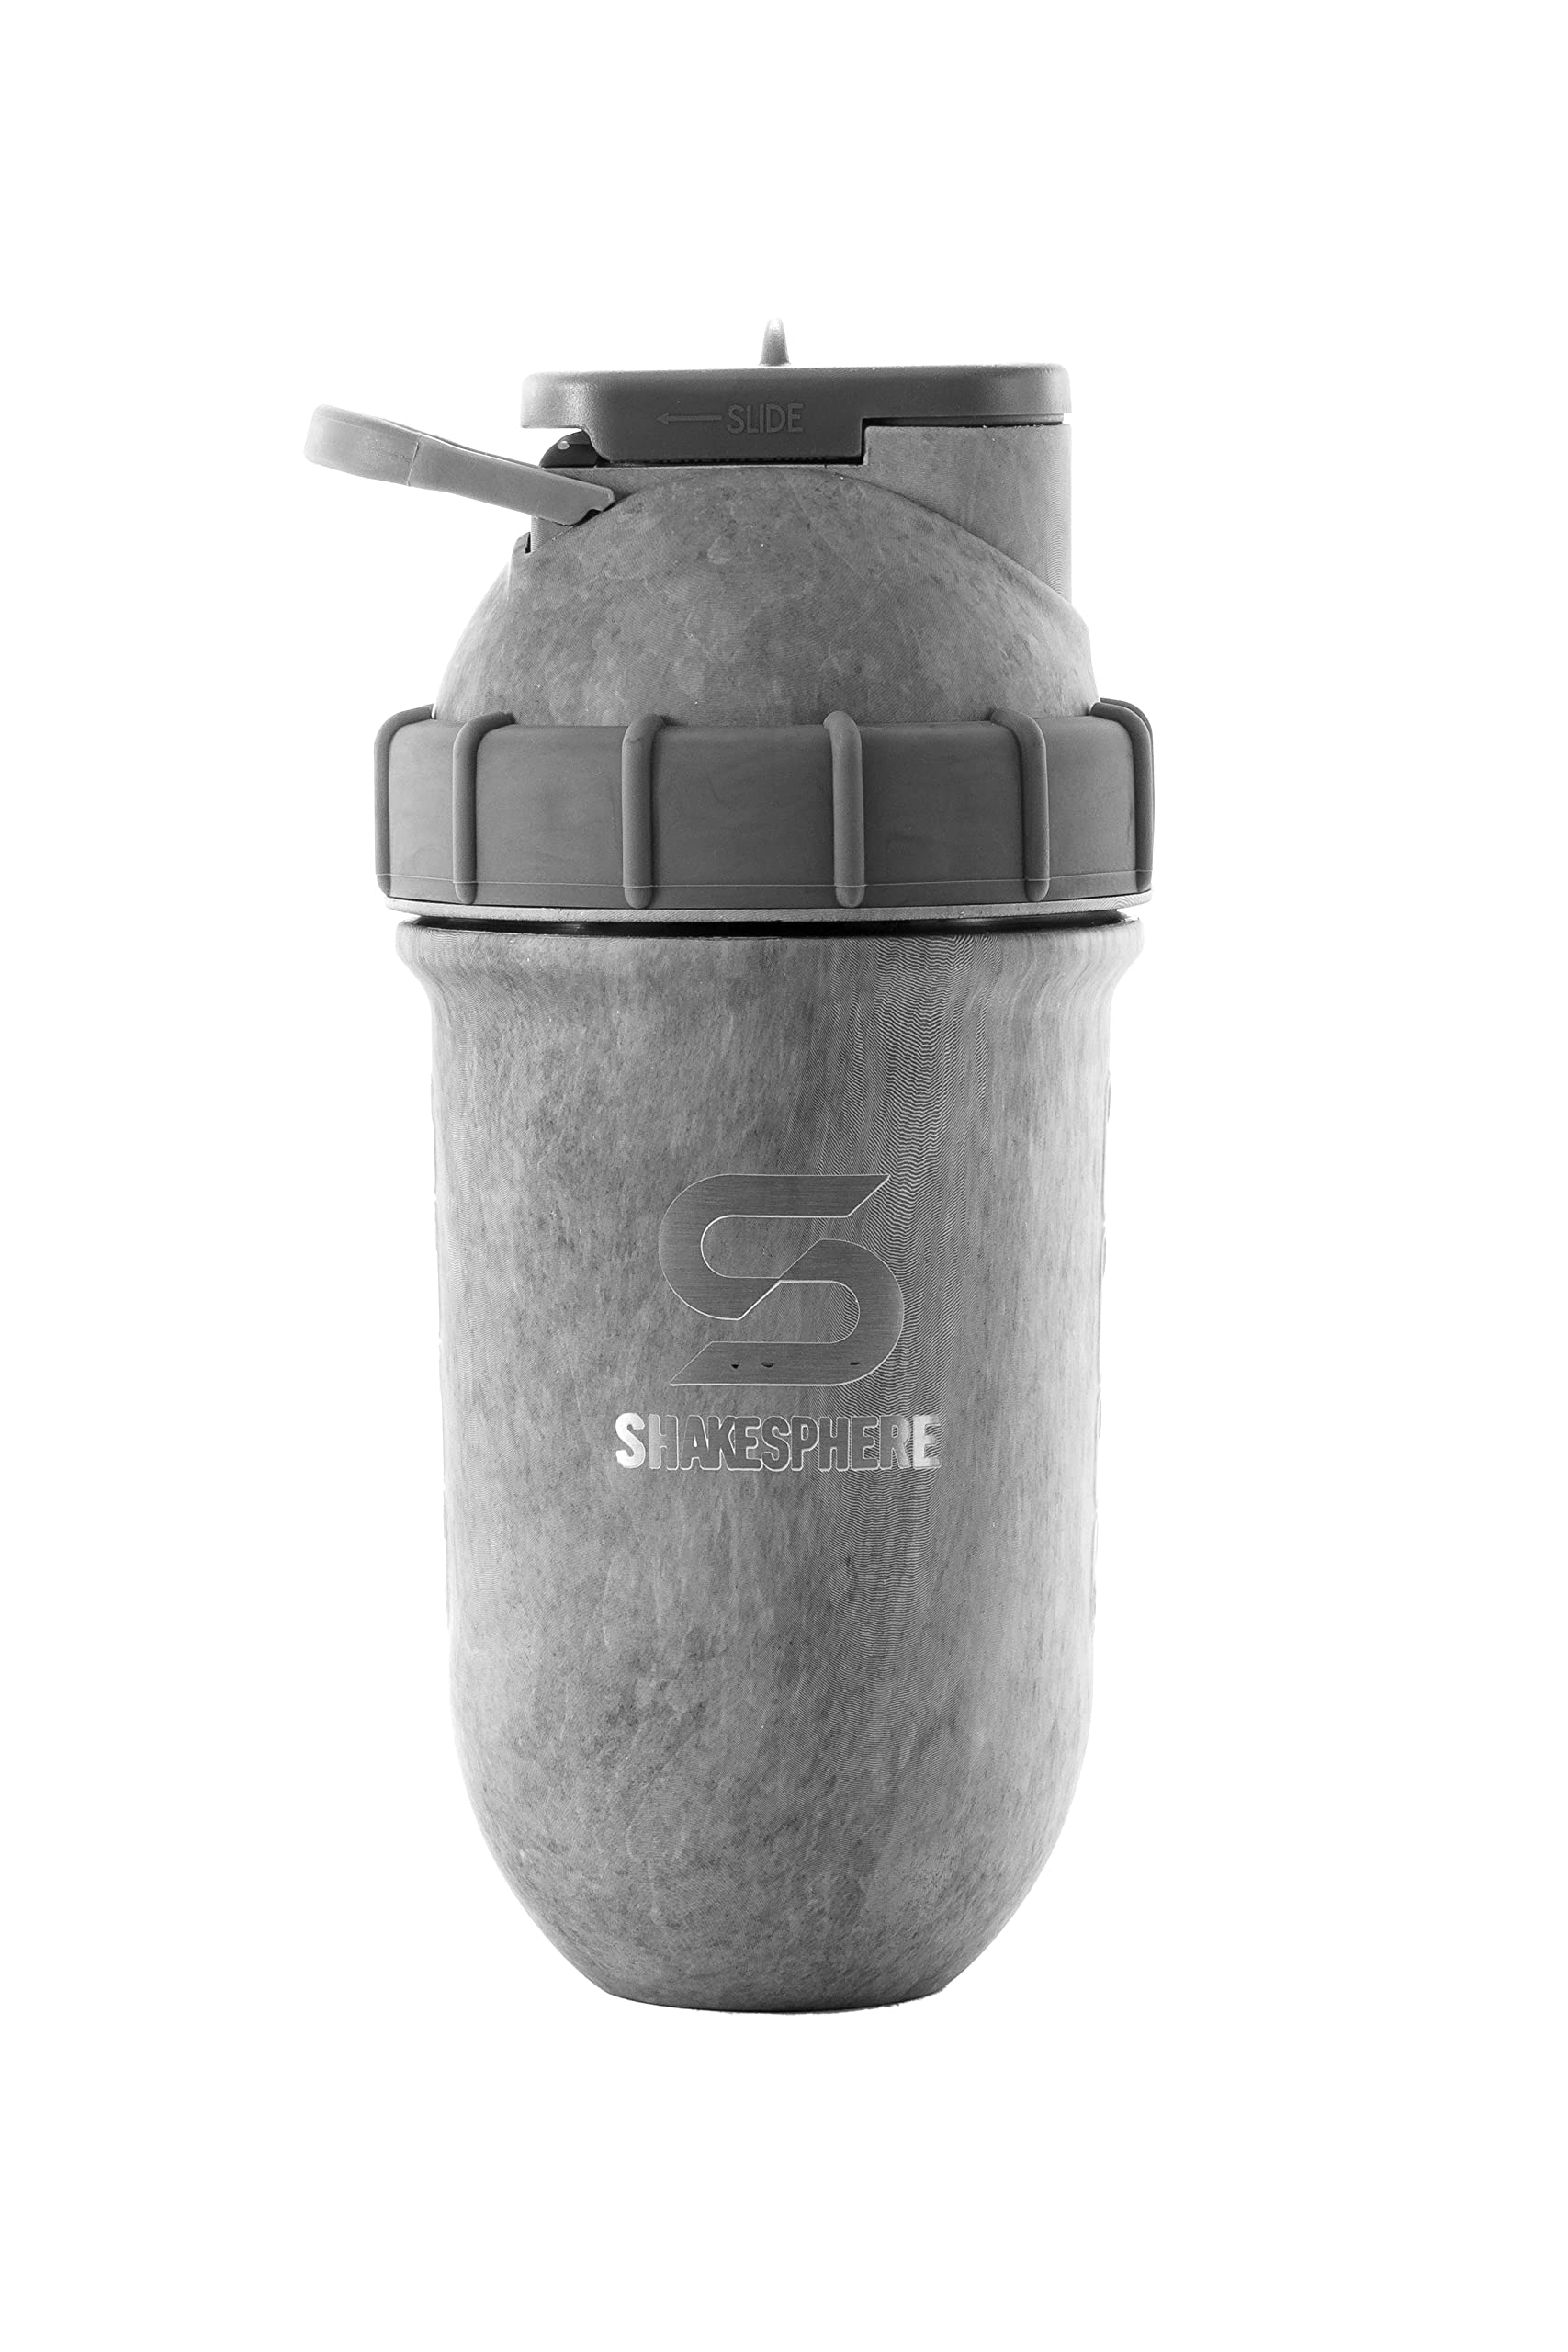 Shakesphere Tumbler Steel: Protein Shaker Bottle Keeps Hot Drinks Hot & Cold  Drinks Cold, 24 Oz. No Blending Ball Or Whisk Needed, Easy Clean Up : Target